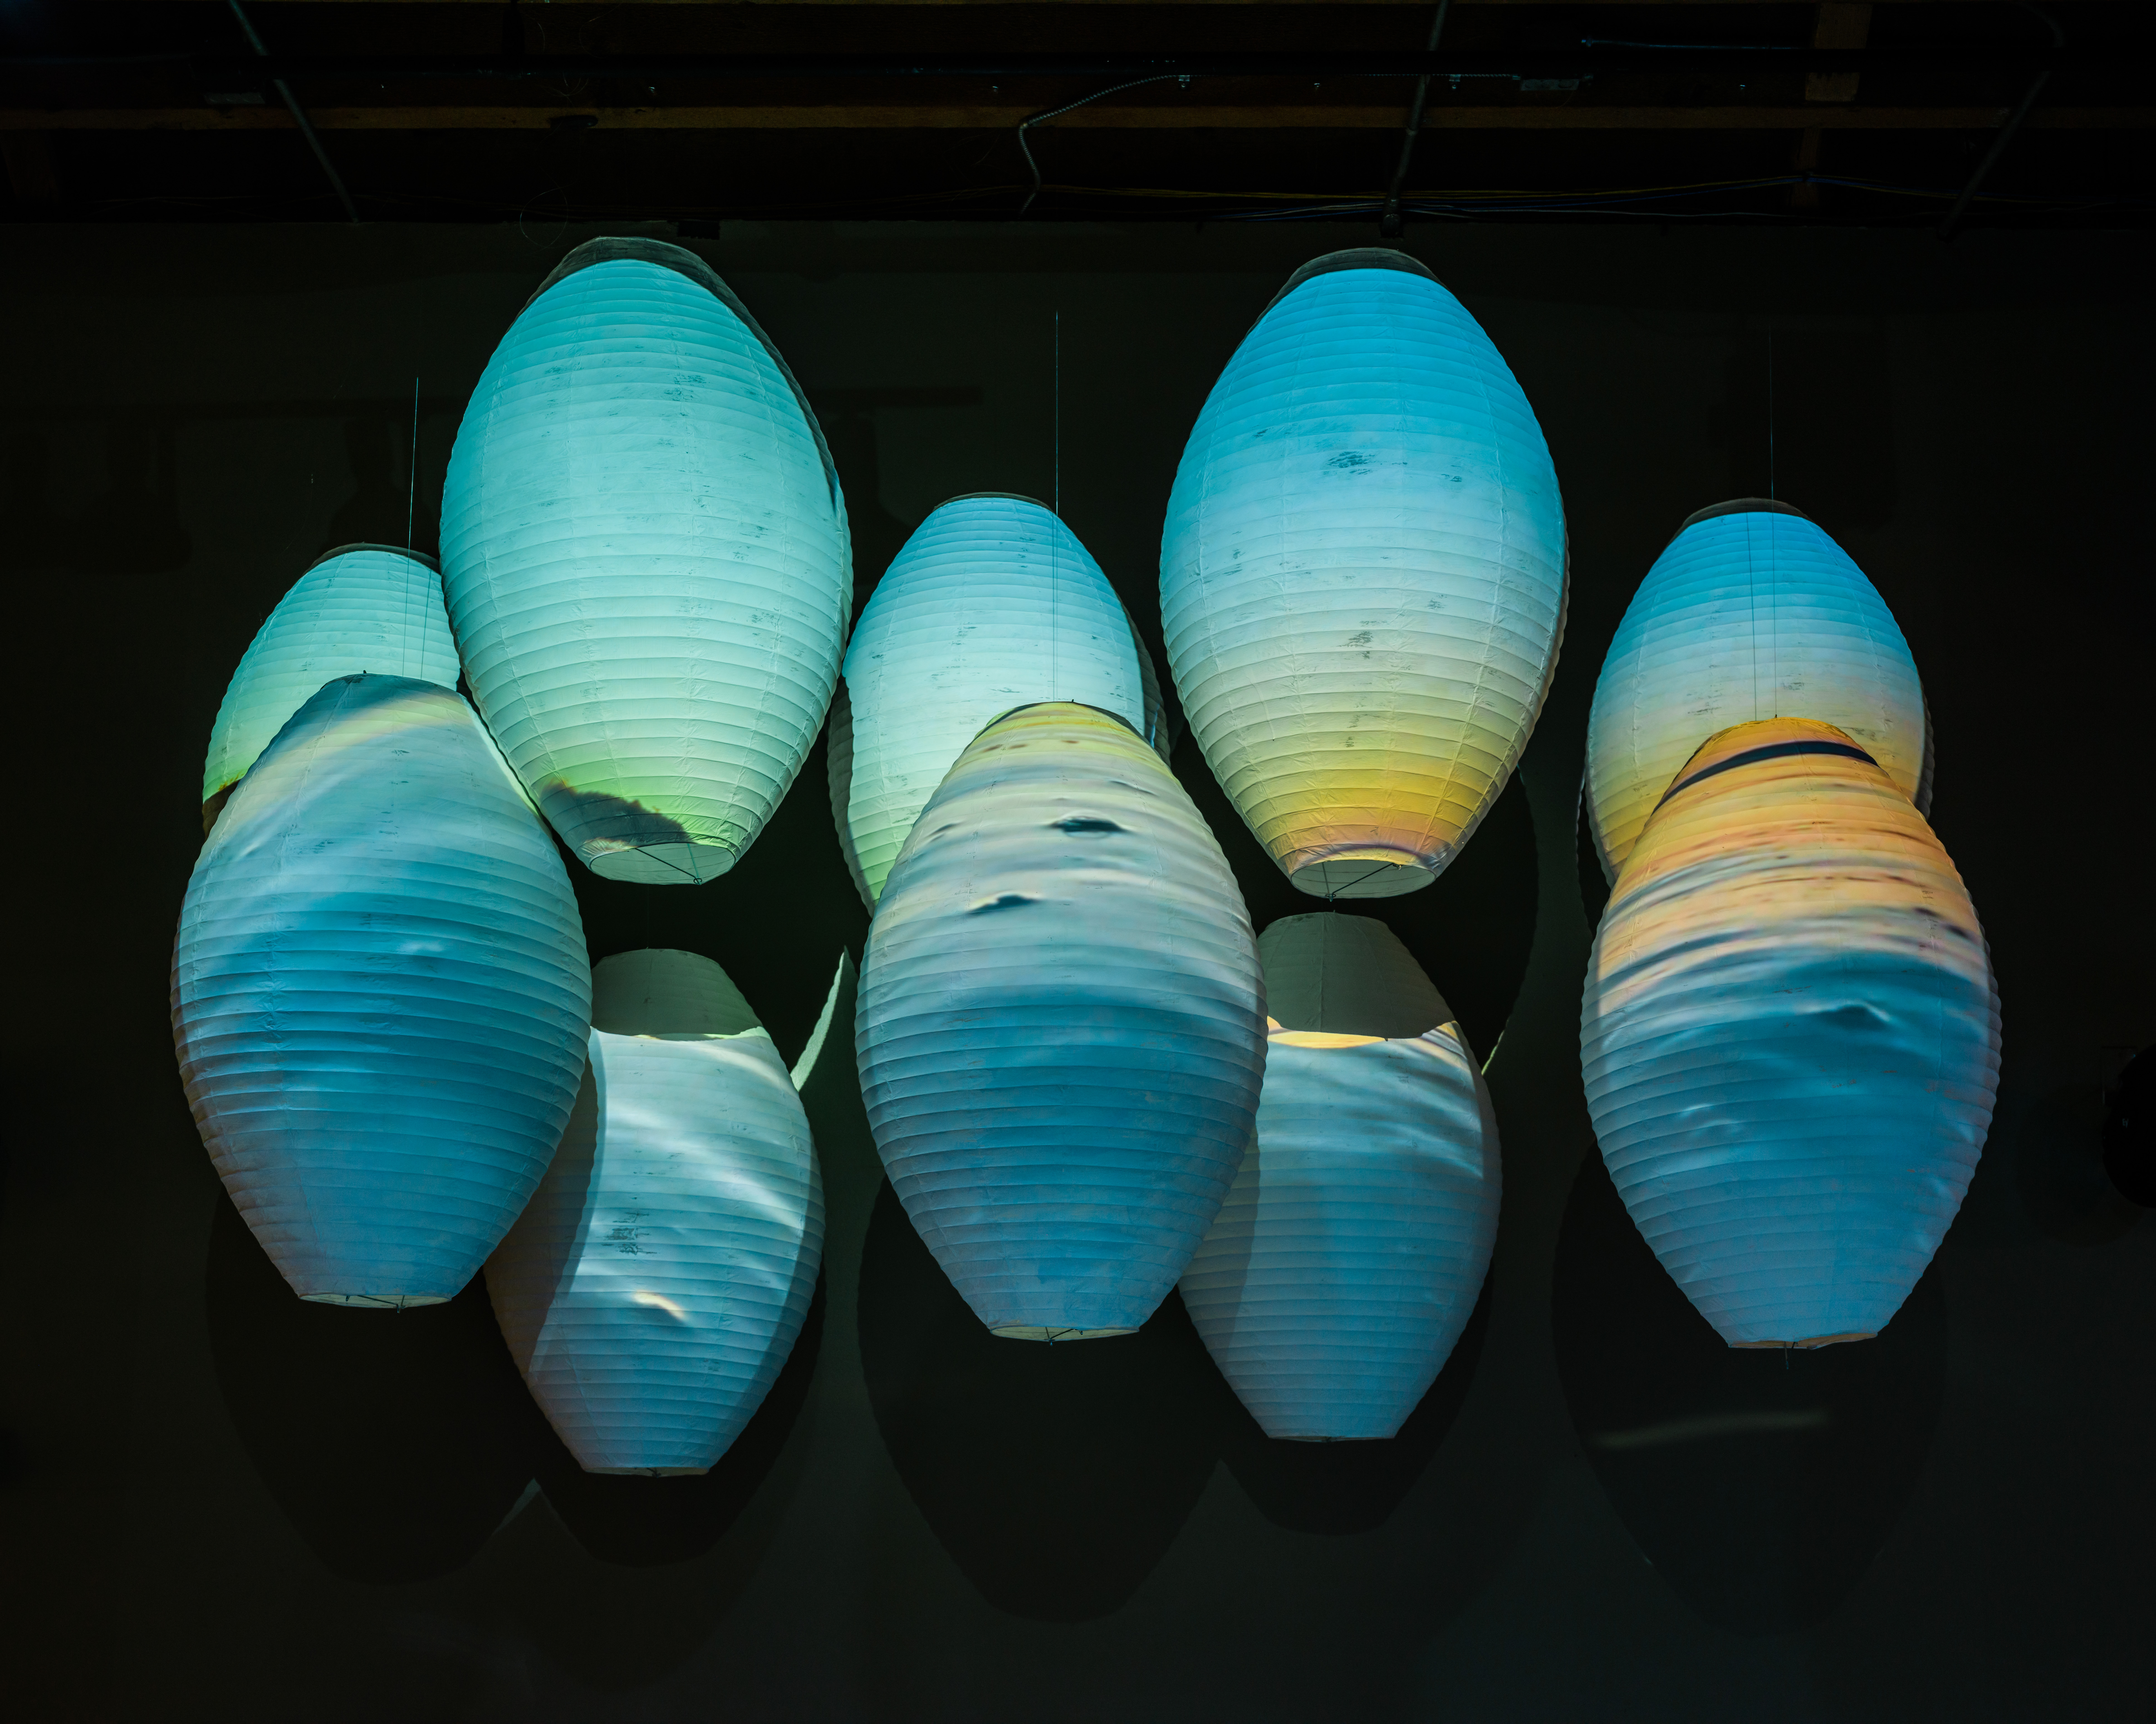 Blue and orange gradients projected onto 10 egg-shaped hanging sculptures